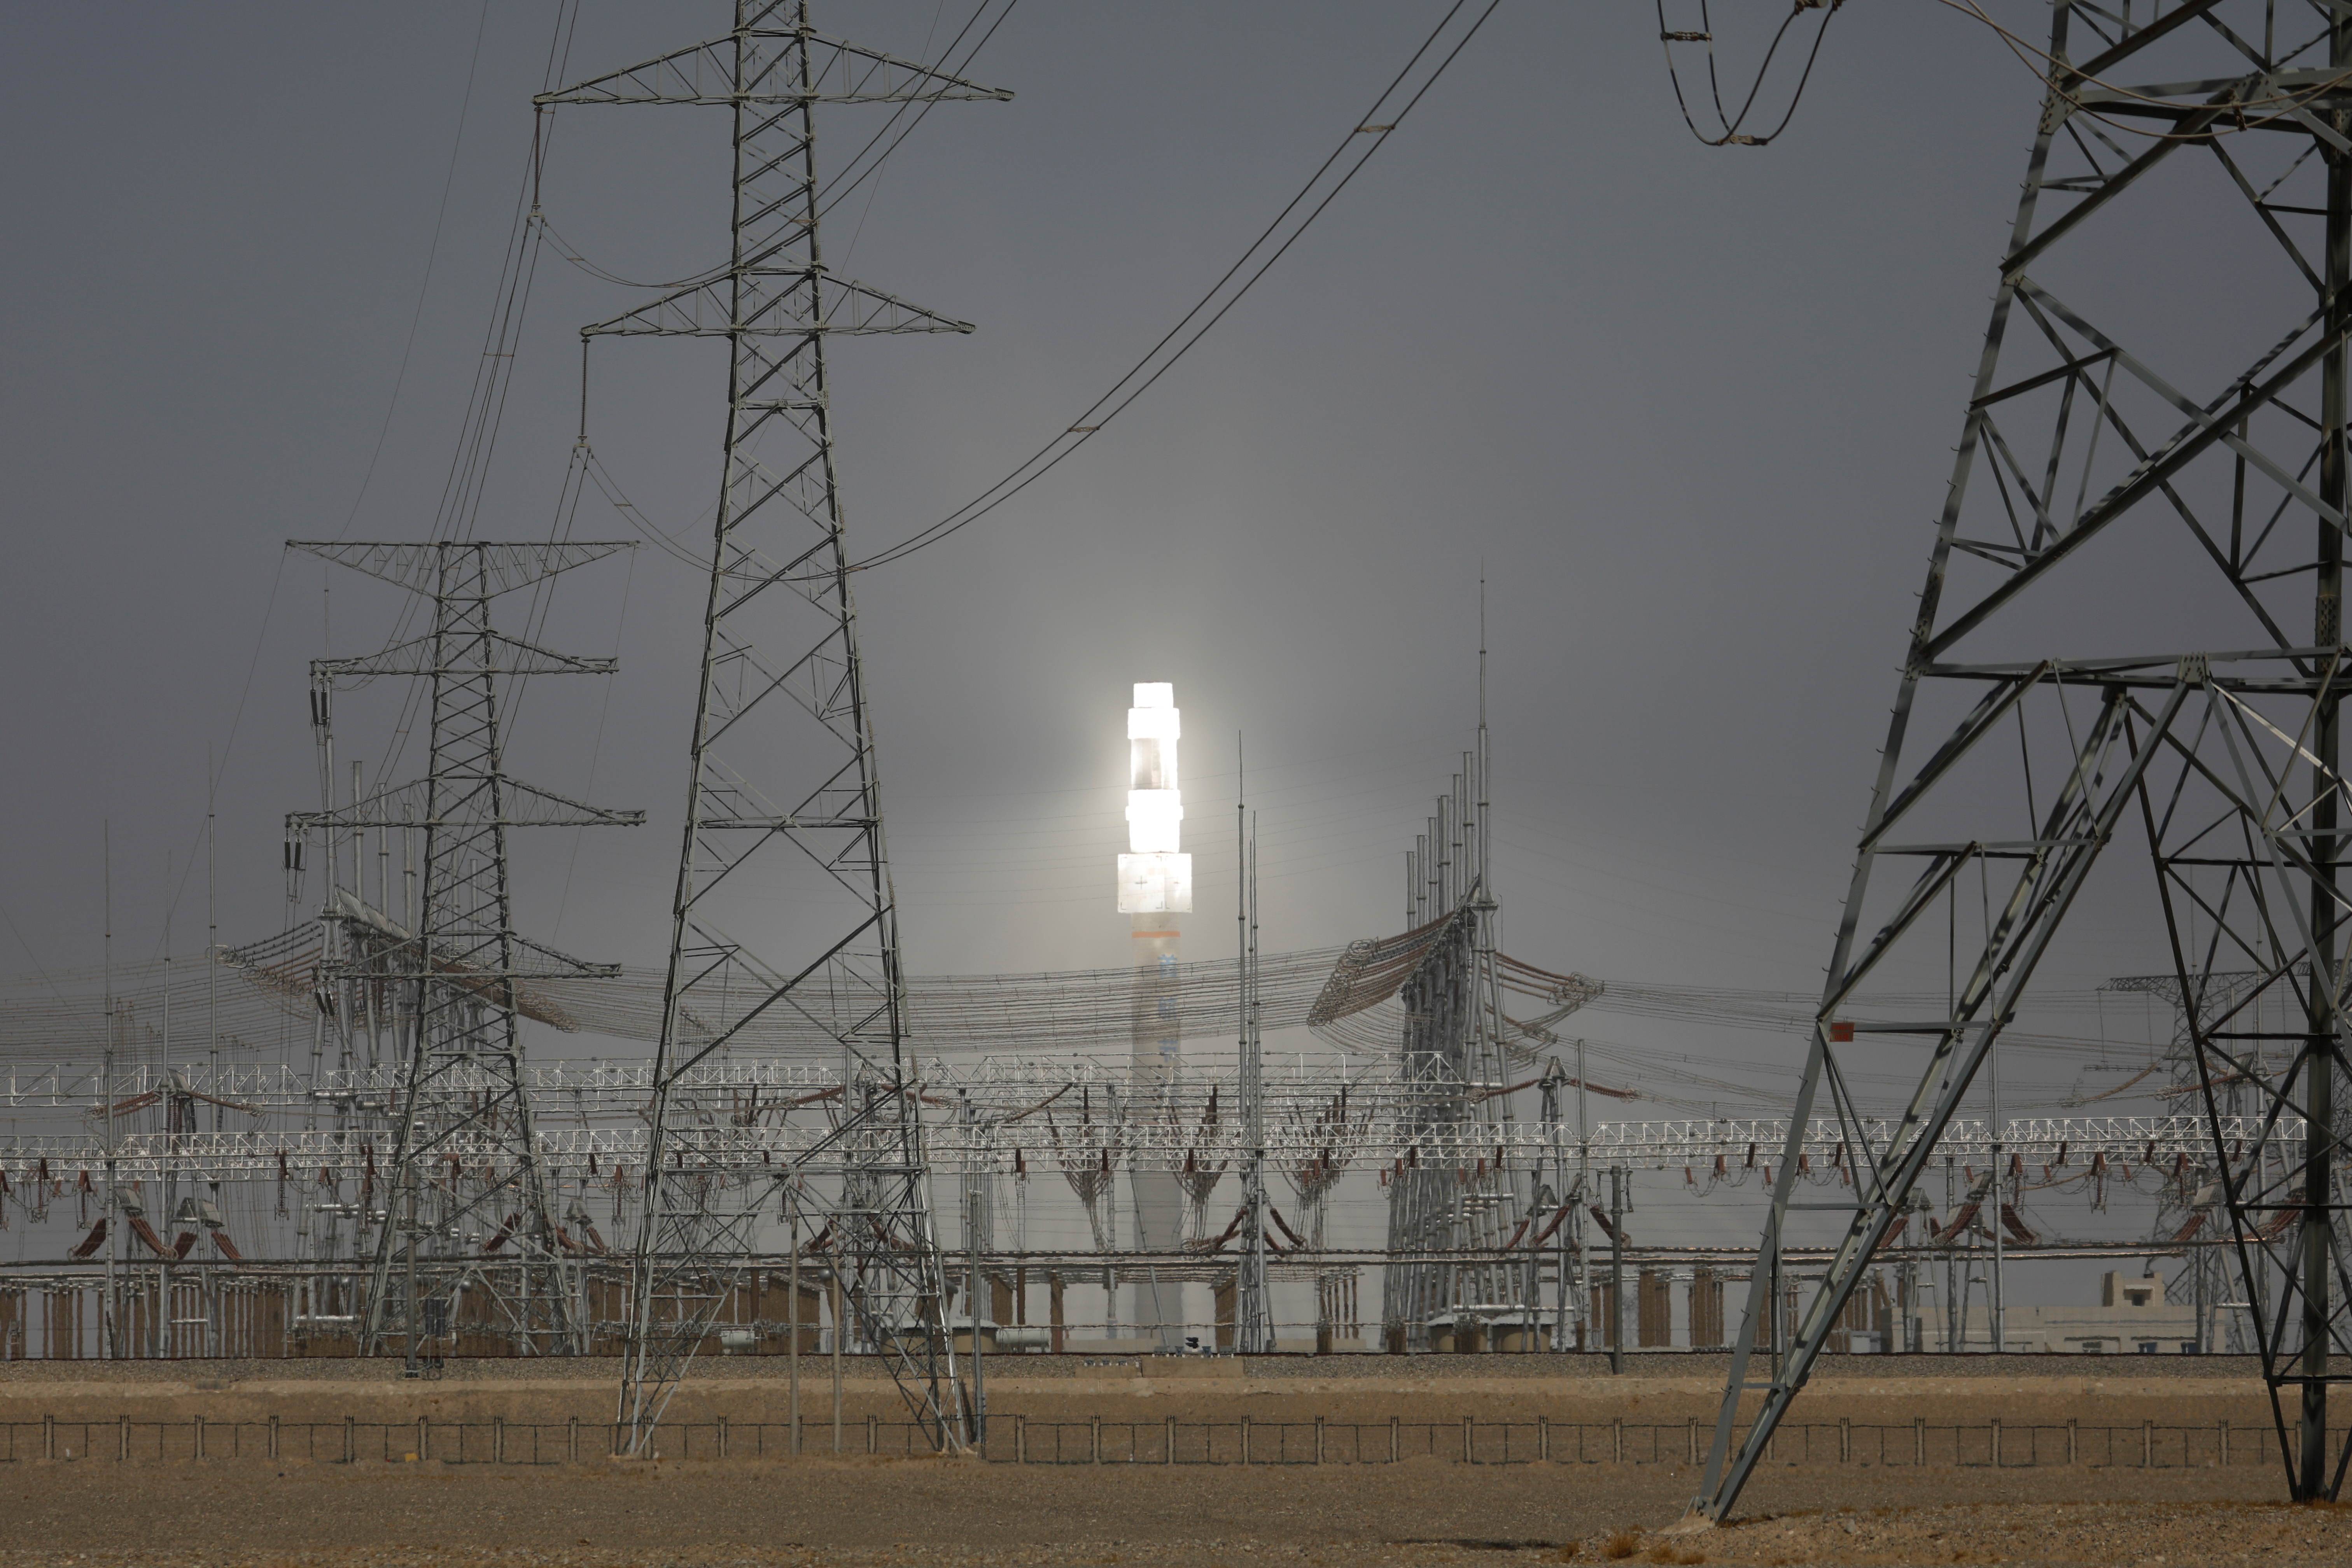 A molten salt solar tower stands behind electricity pylons at a power station near Dunhuang